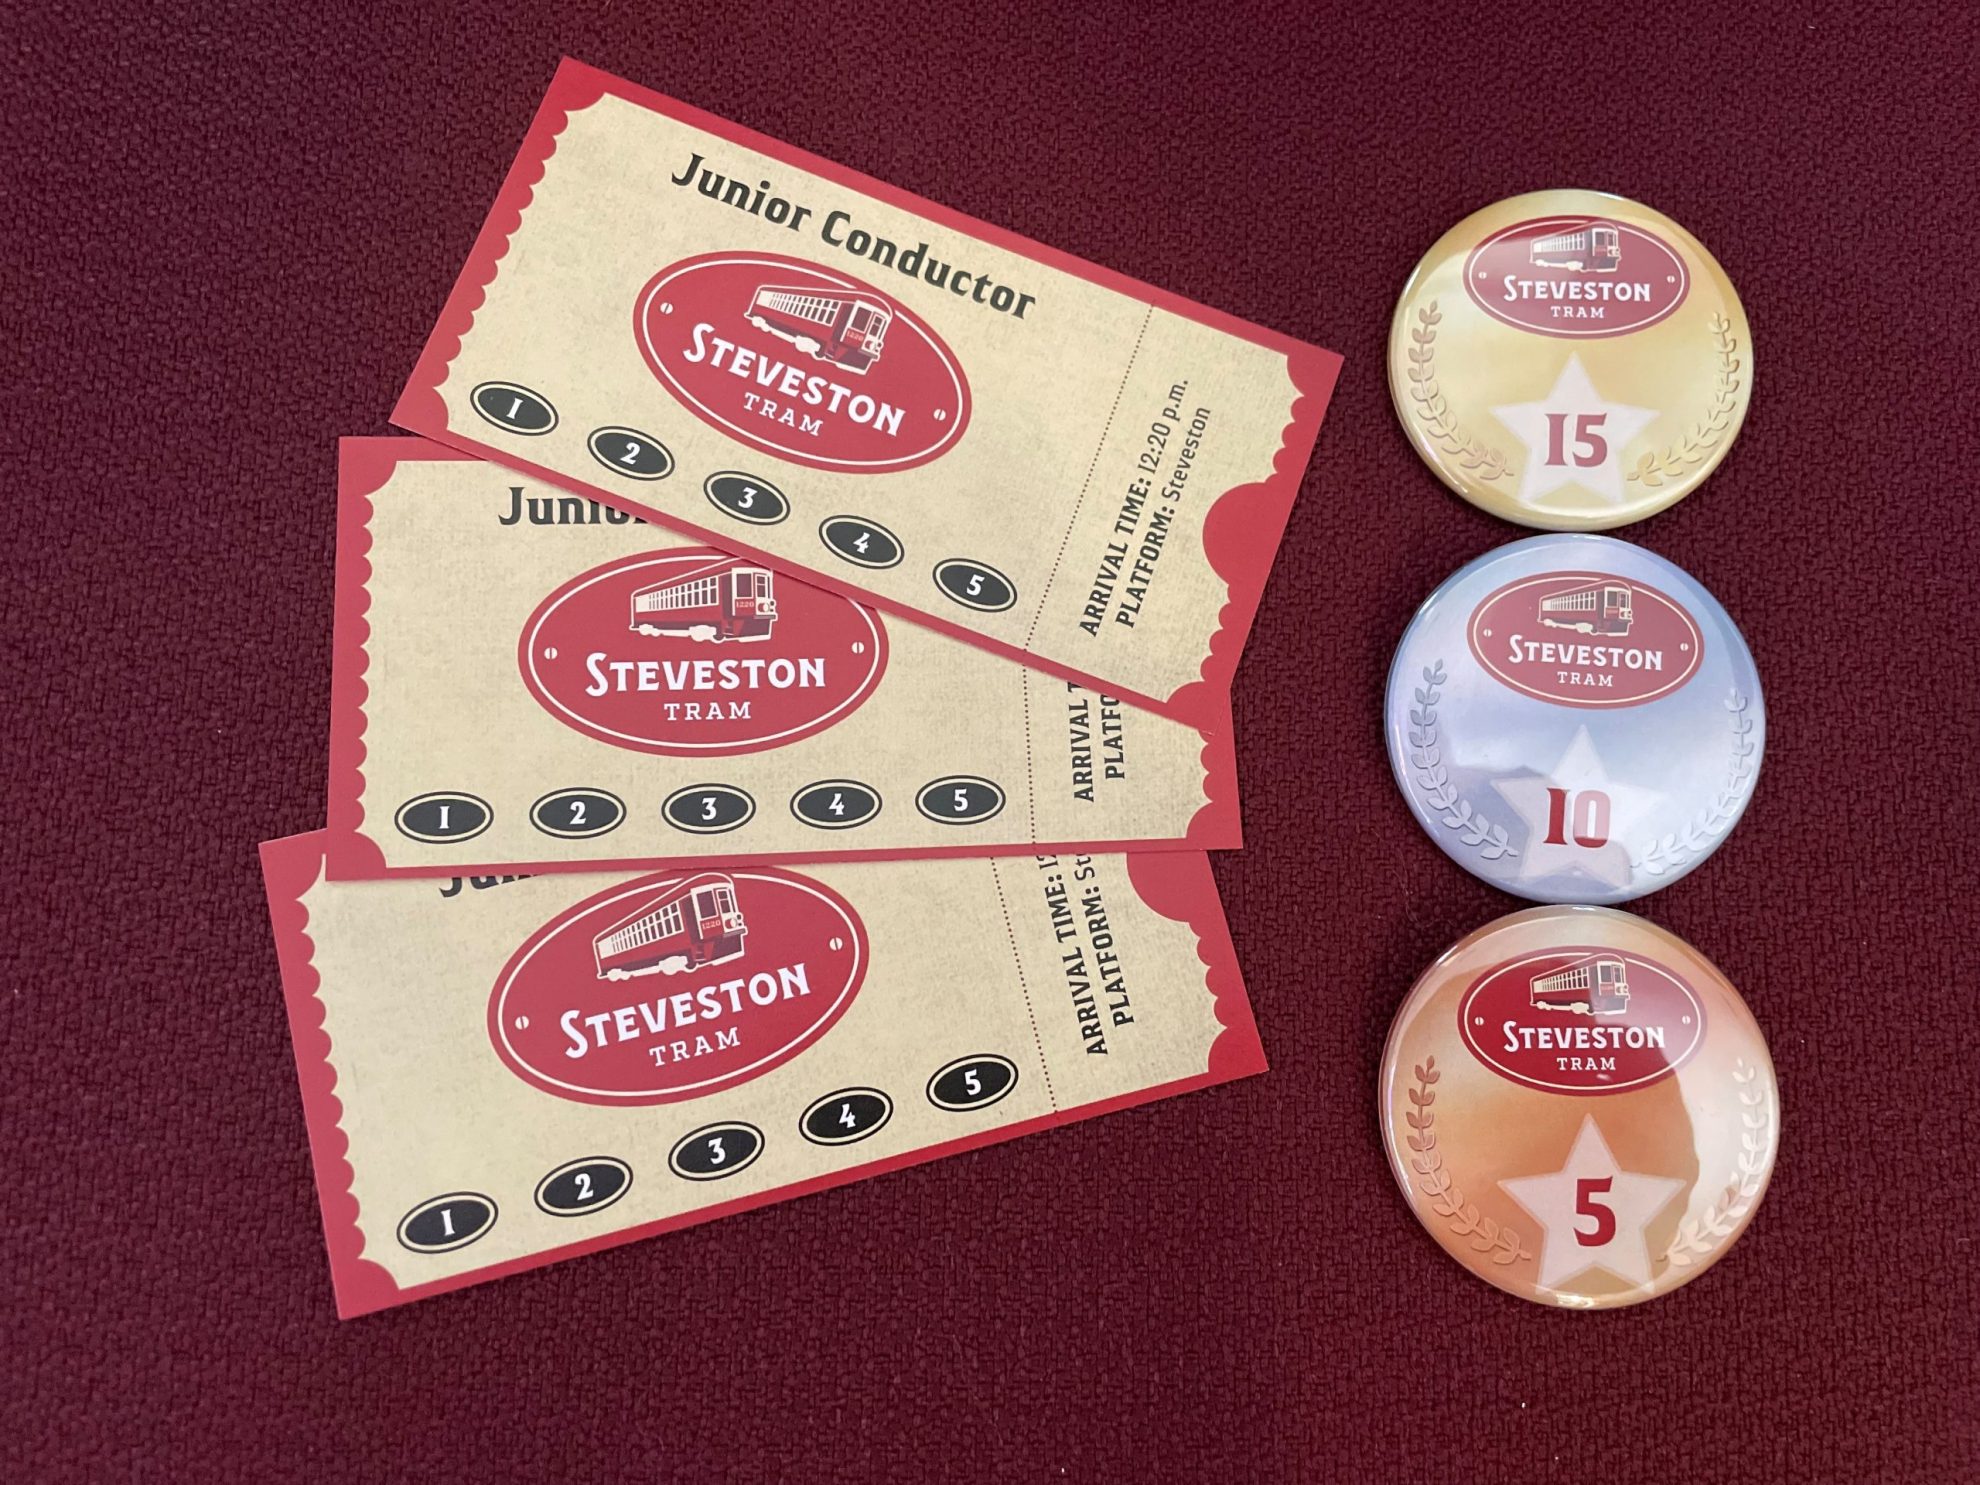 Three Steveston Tram Junior Conductor tickets and three button badges laid on a dark red background